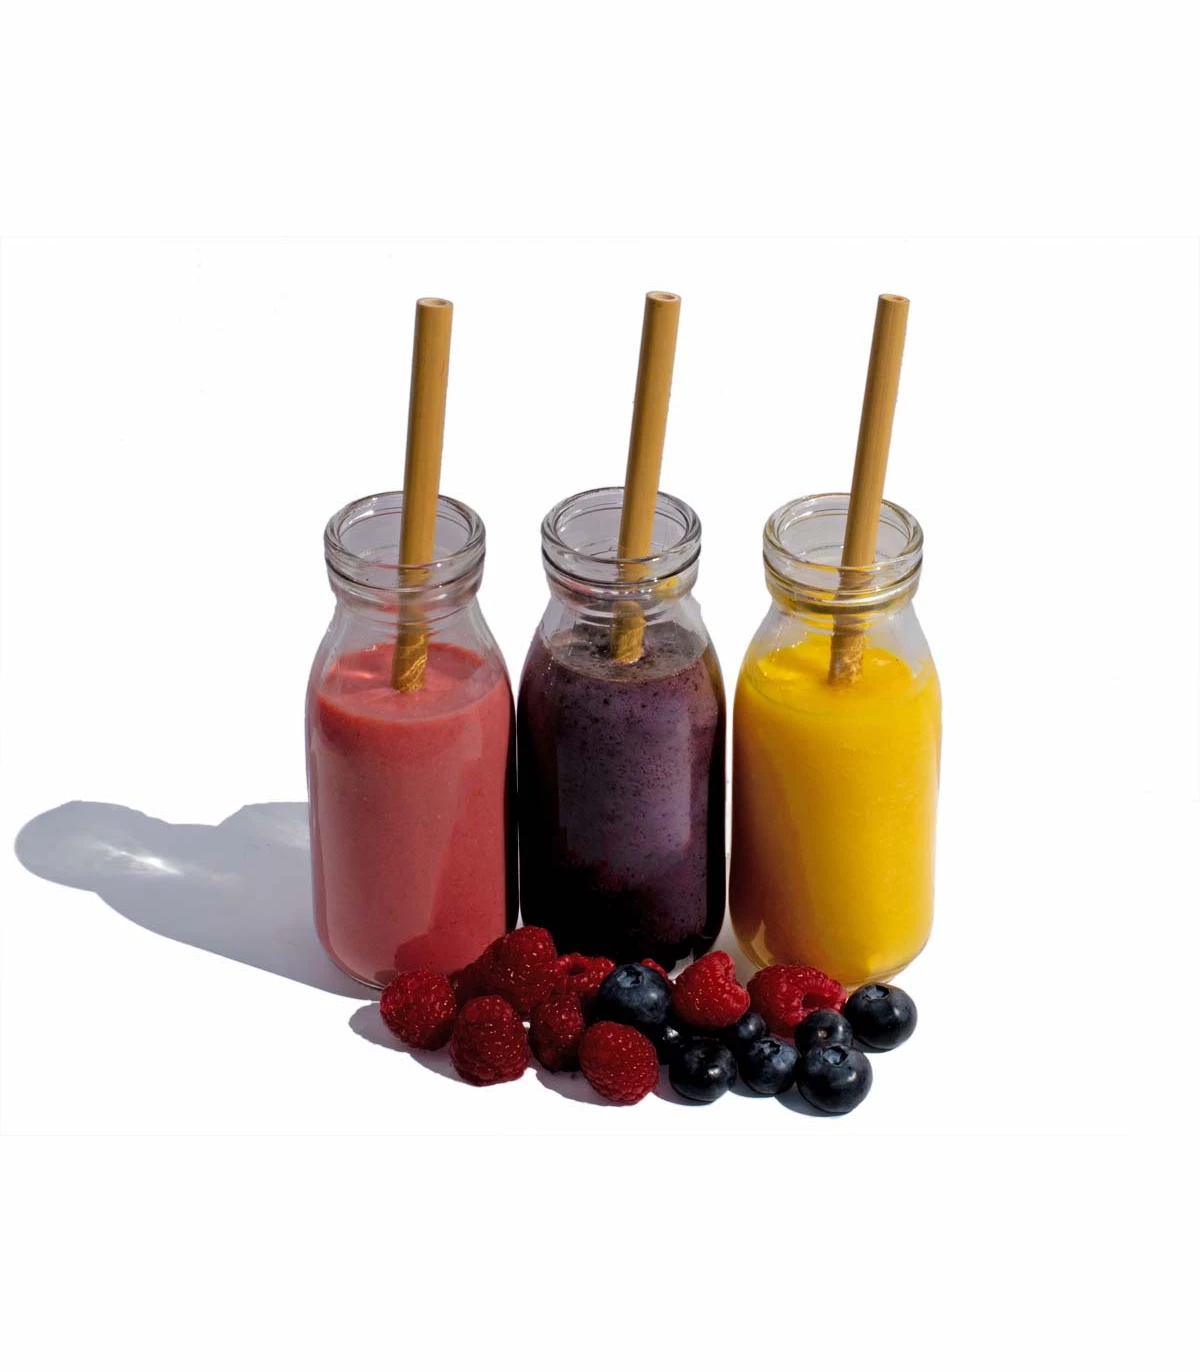 Brushes, bottles, glass straws - accessories for smoothies & juices